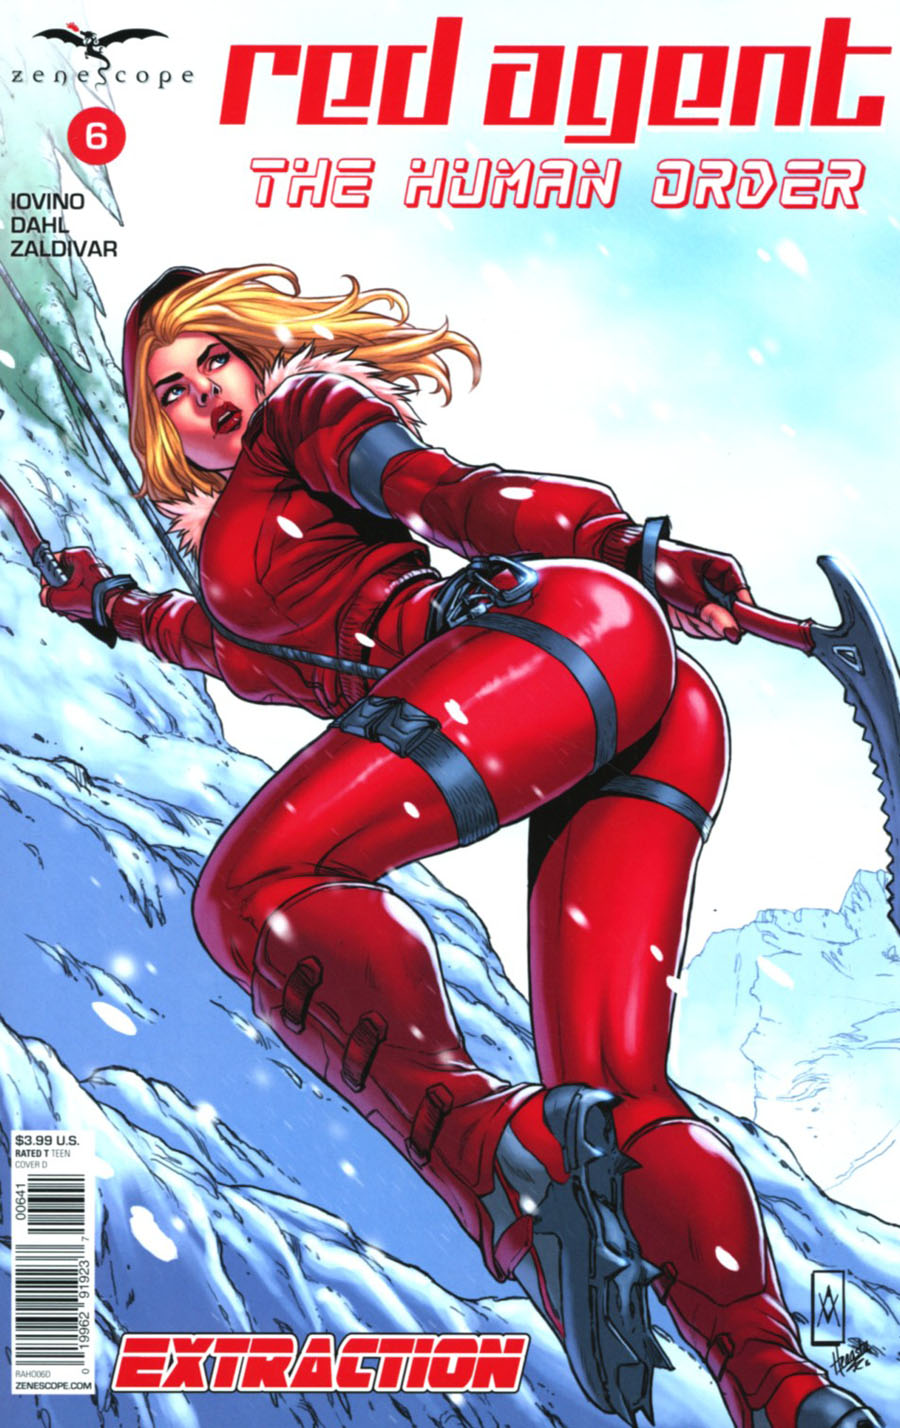 Grimm Fairy Tales Presents Red Agent Human Order #6 Cover D Ario Murti